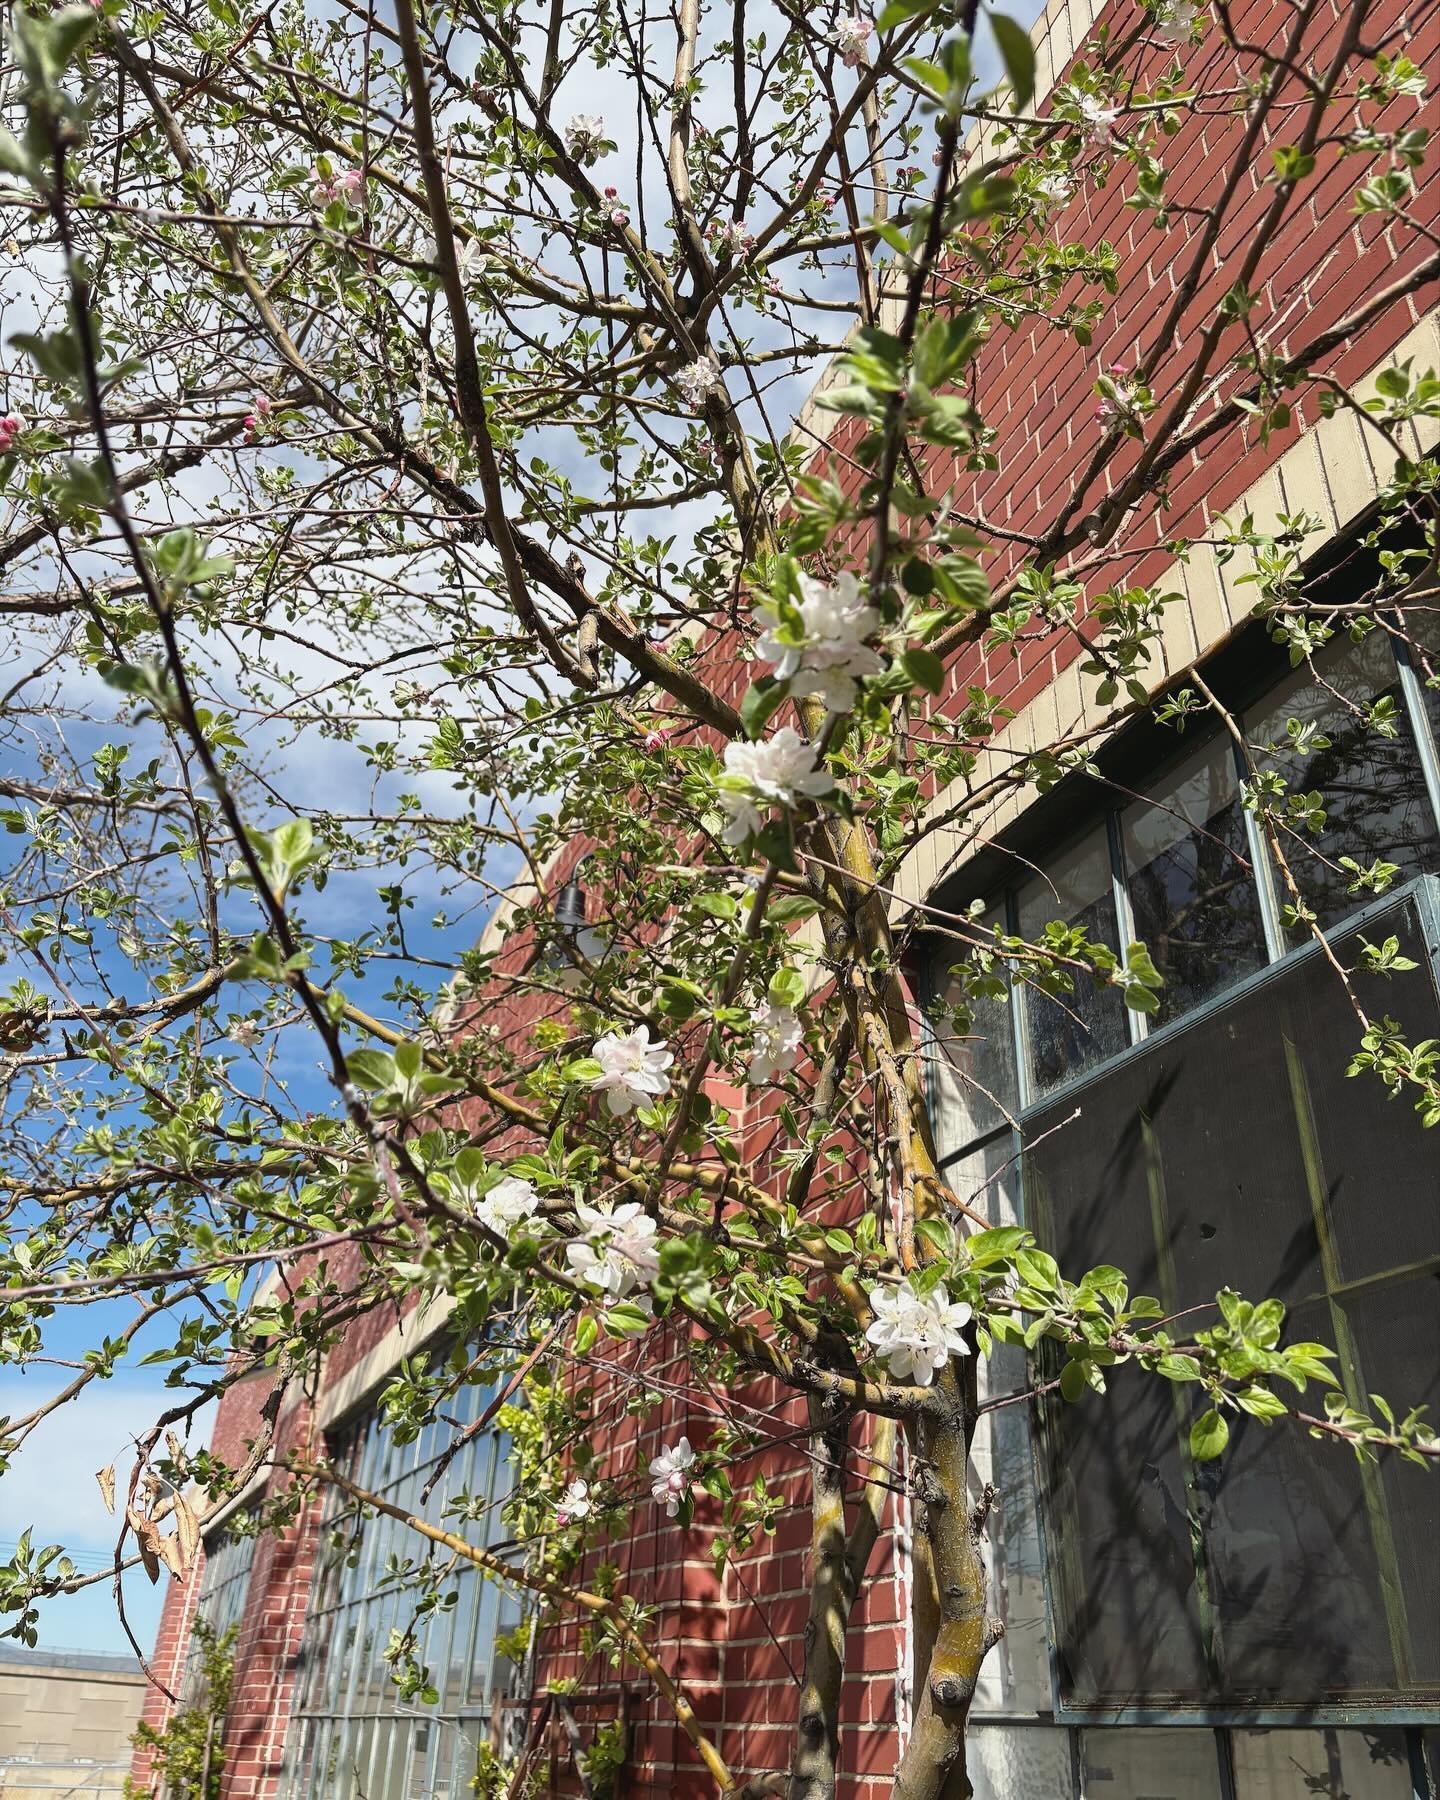 April was a stressy mess, but at least the trees are blossoming and I found a new apartment to call home in a few weeks (sneak peek of the balcony on the last slide!) 🌳🏠